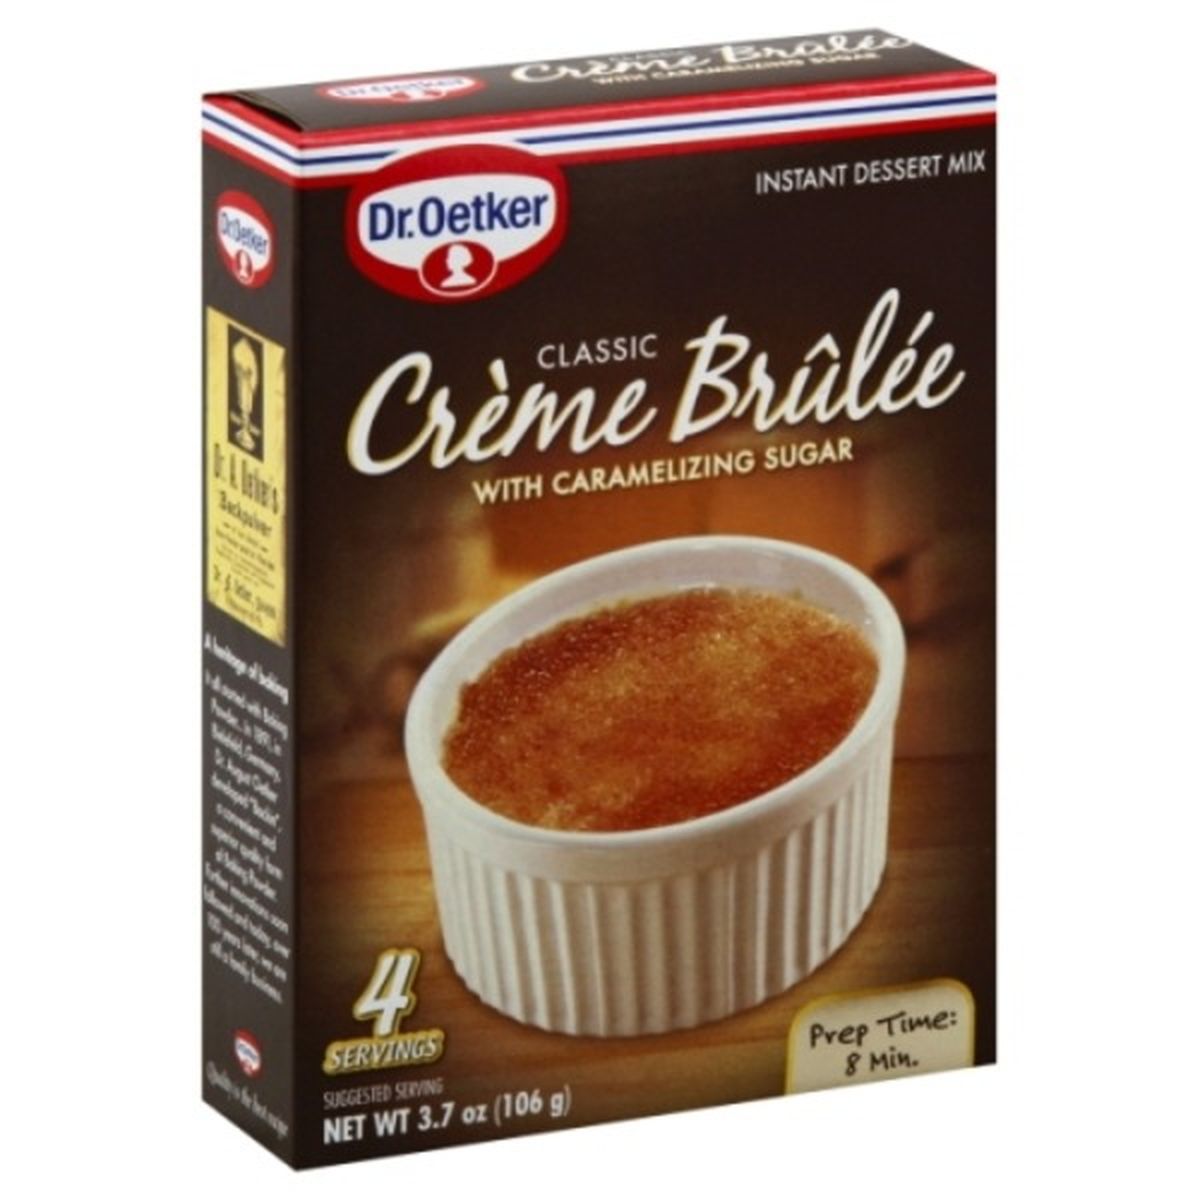 Calories in Dr. Oetker Instant Dessert Mix, Classic Creme Brulee